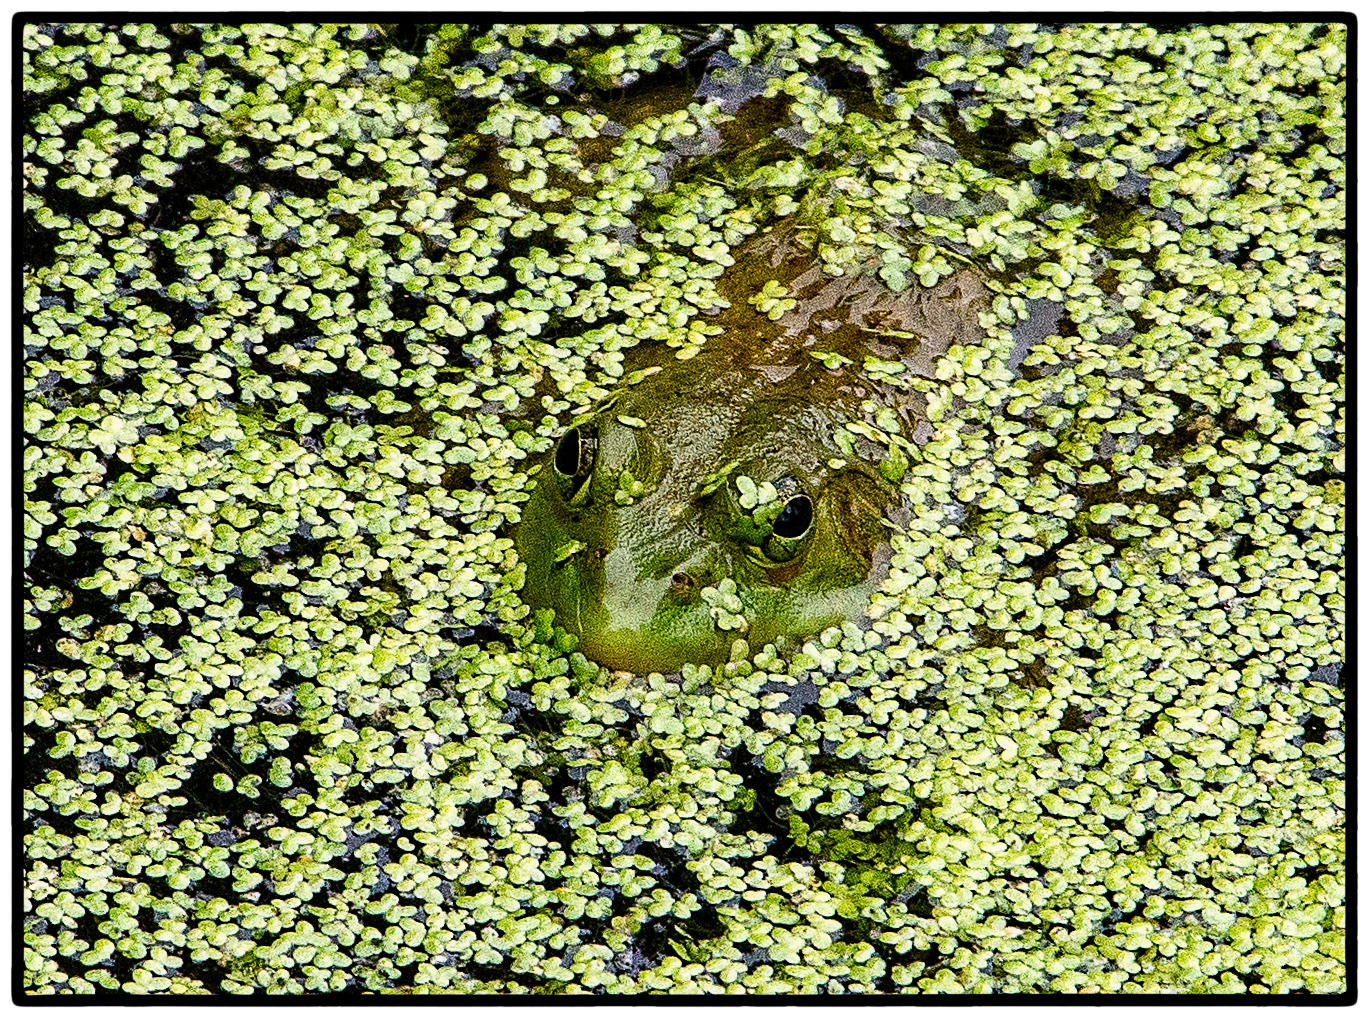 Green Frog in the Green